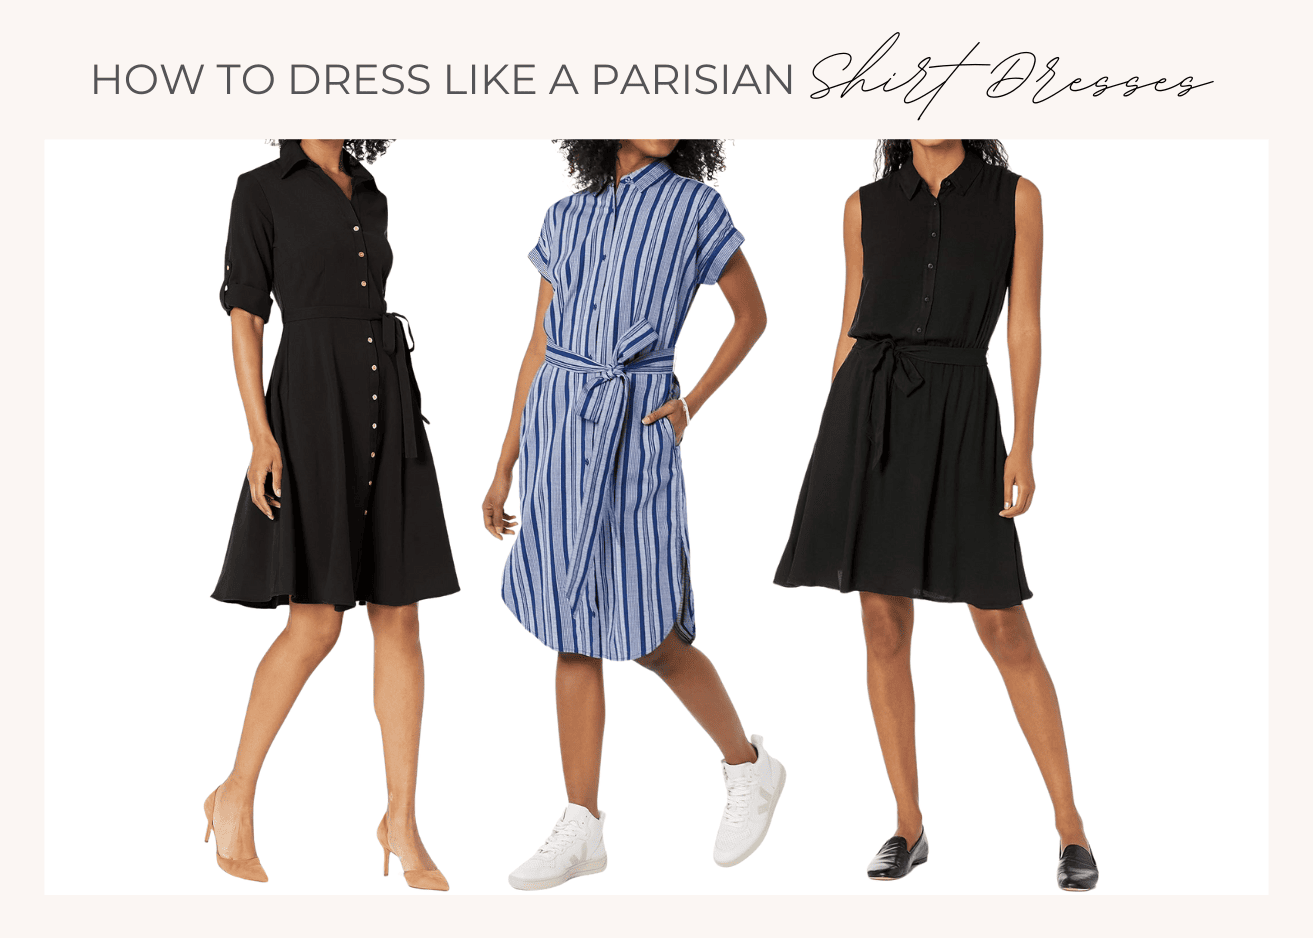 Collage image featuring dresses titled "How to dress like a parisian shirt dresses"